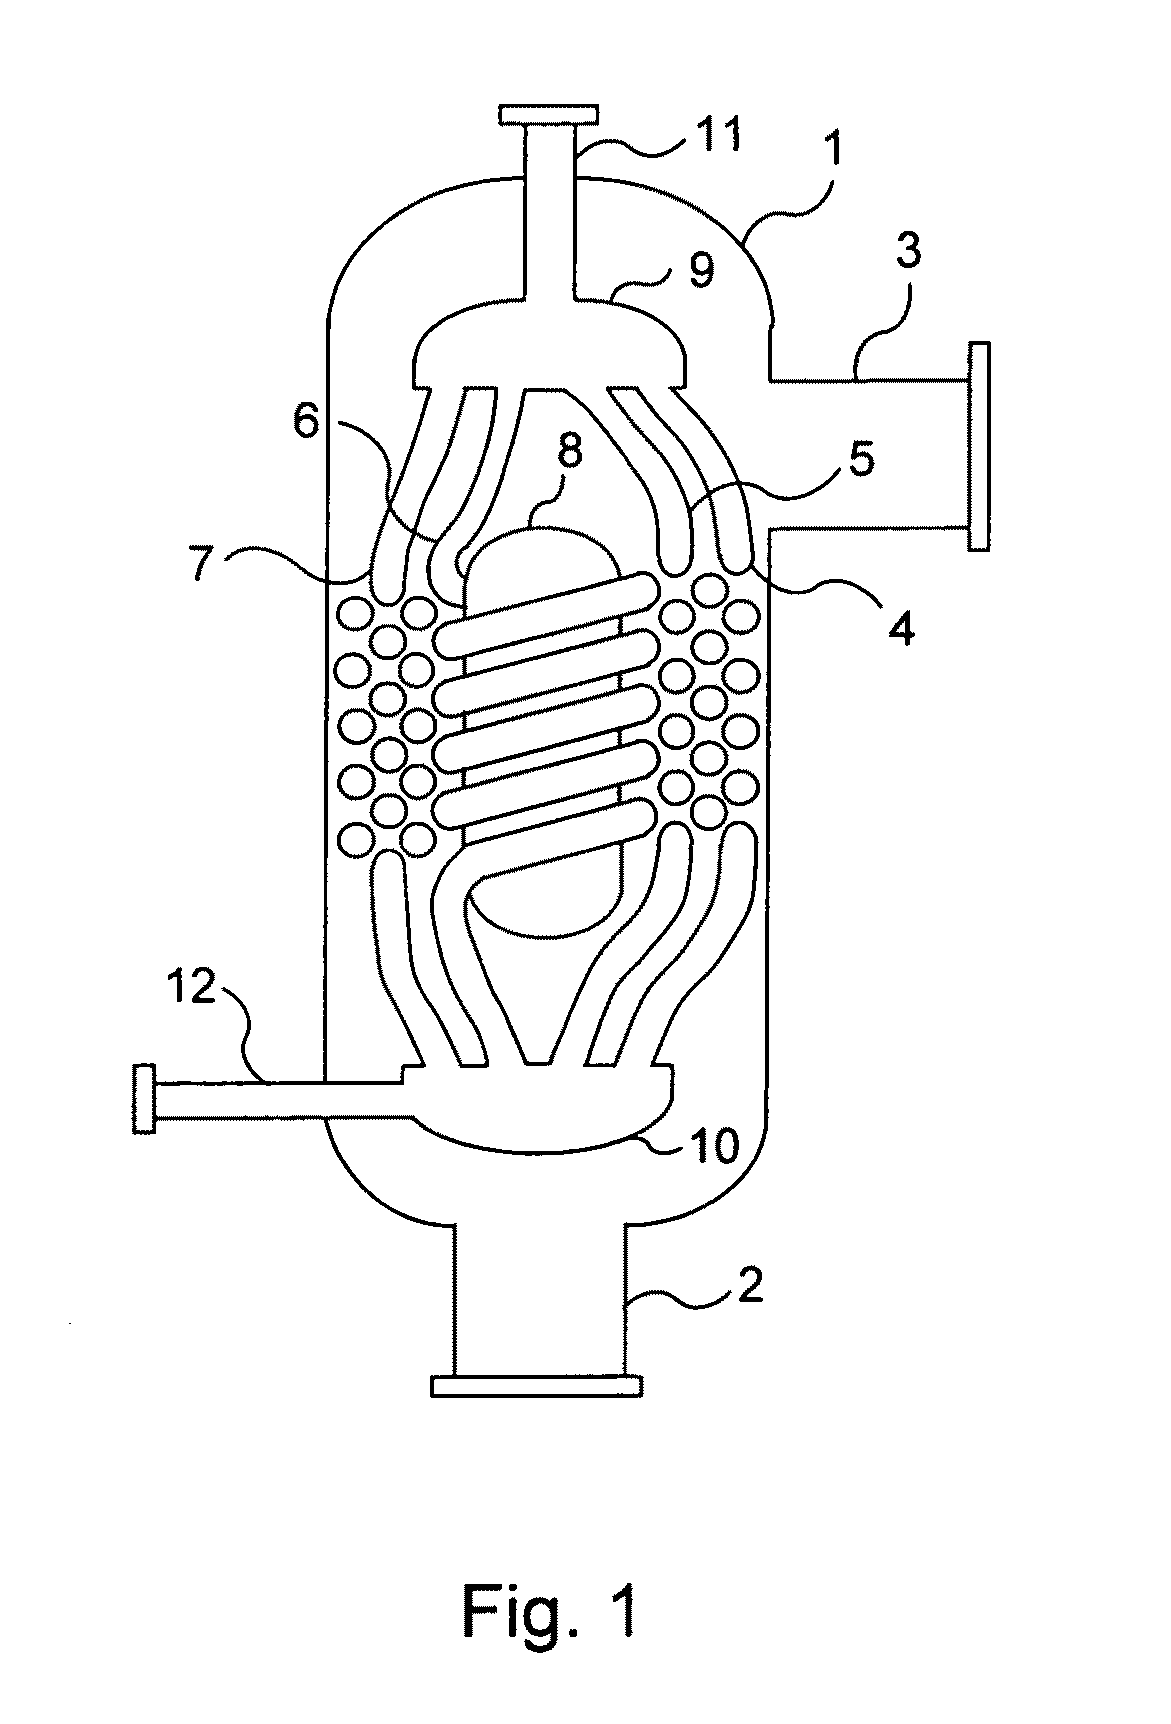 Multiple concentric cylindrical co-coiled heat exchanger